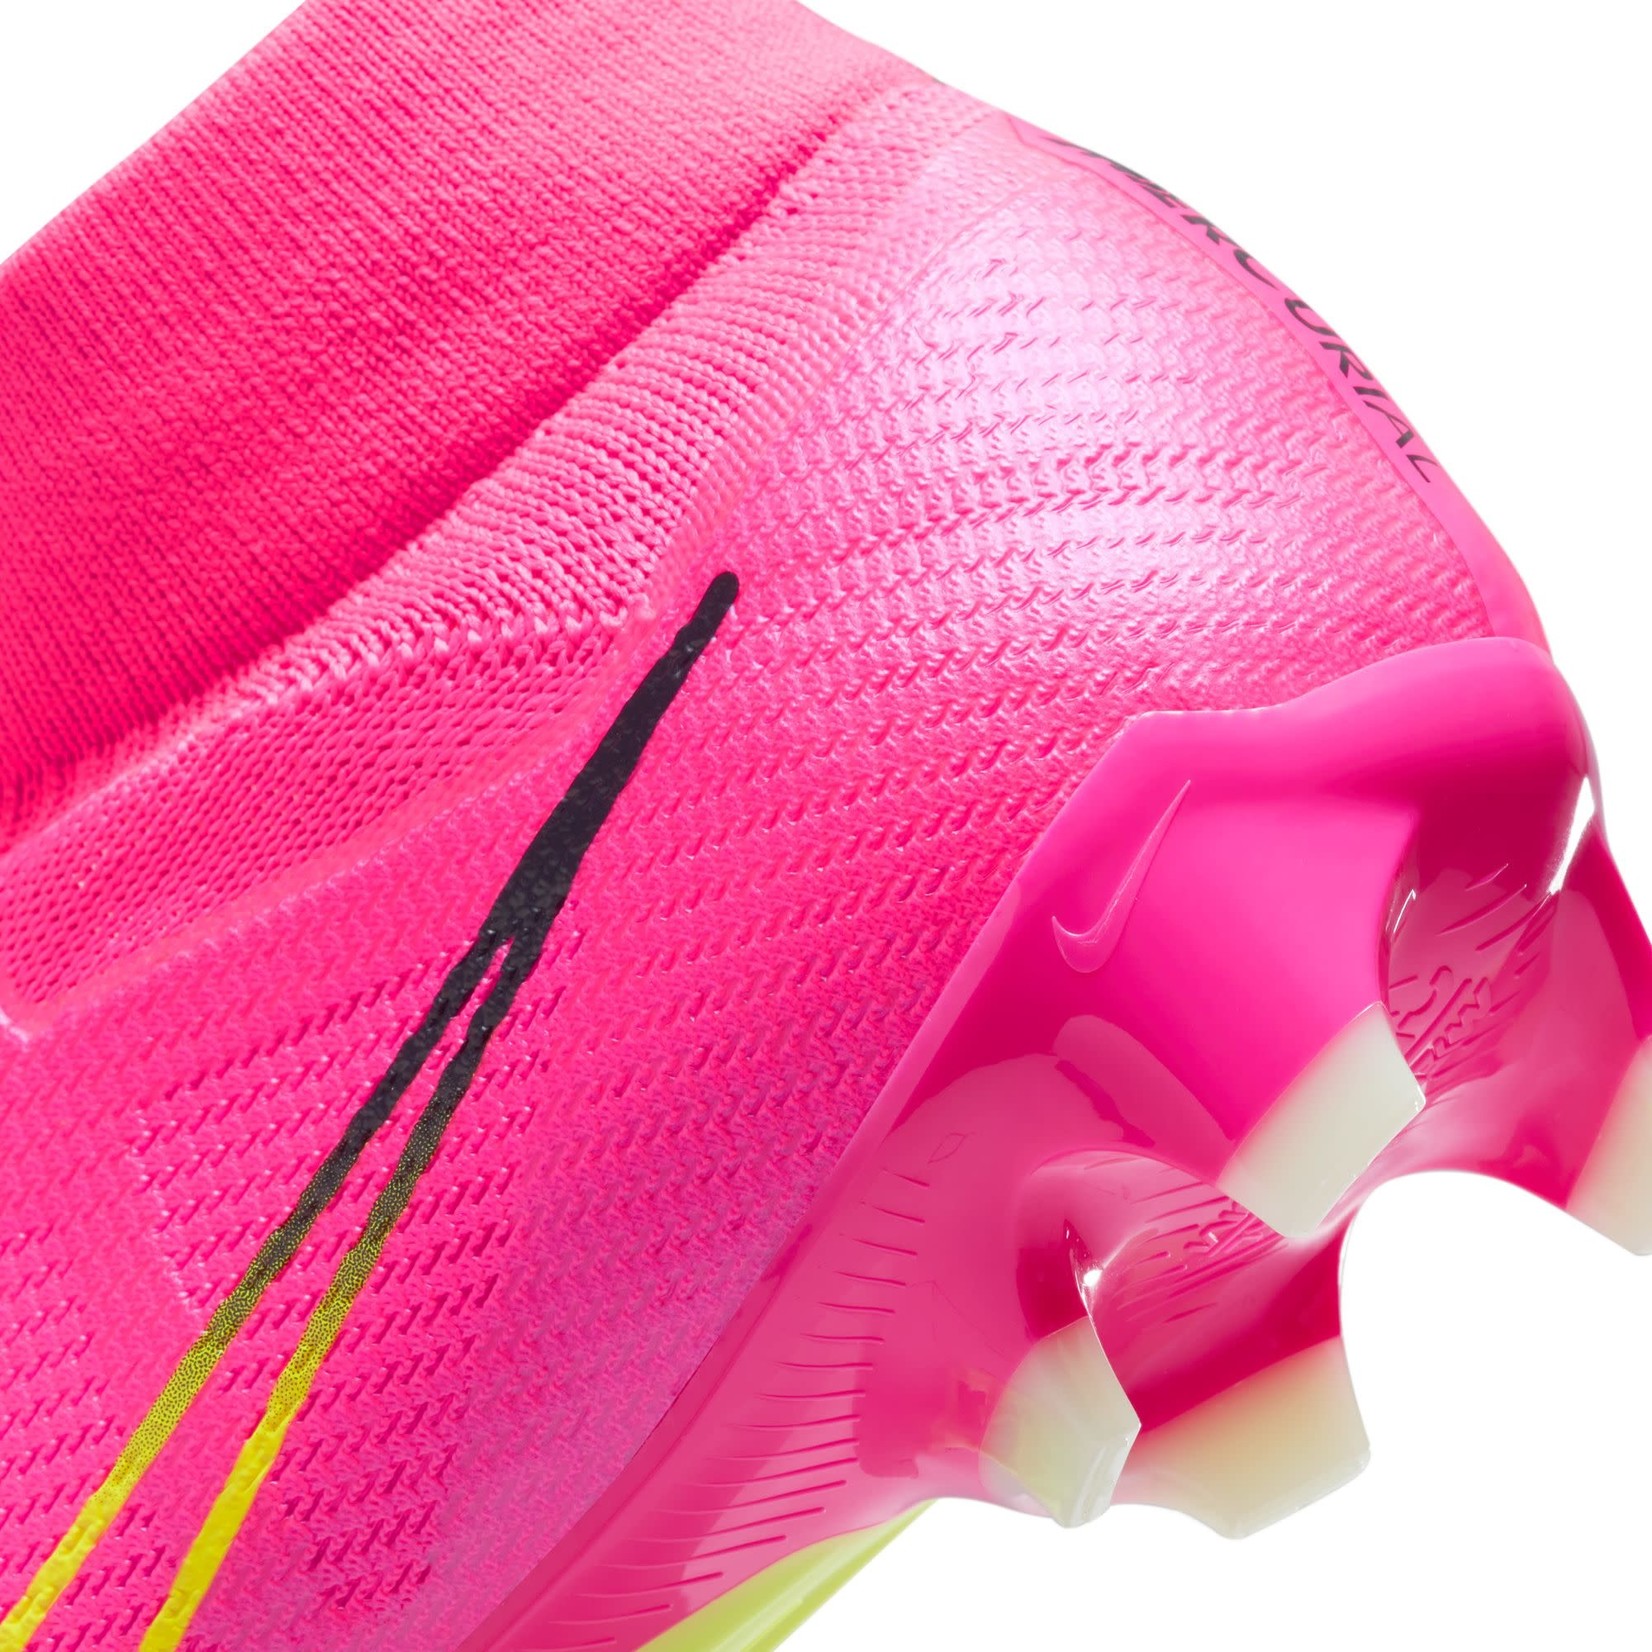 NIKE ZOOM MERCURIAL SUPERFLY 9 PRO FG (PINK/VOLT)